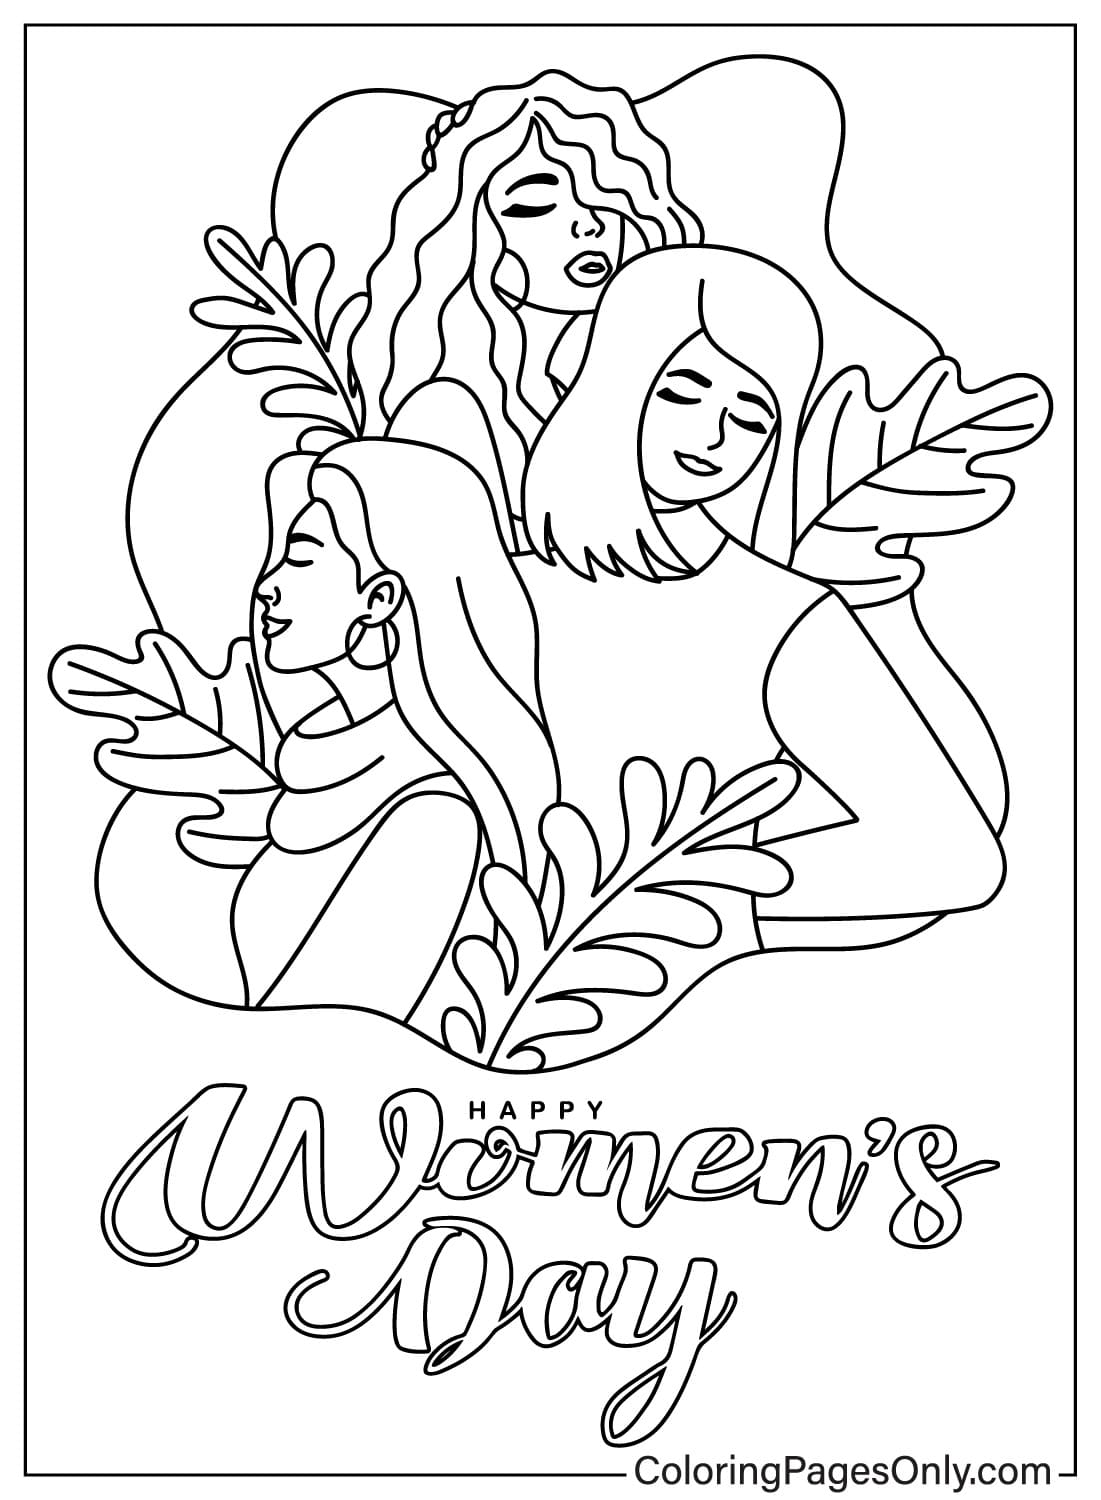 Womens Day Coloring Page to Print